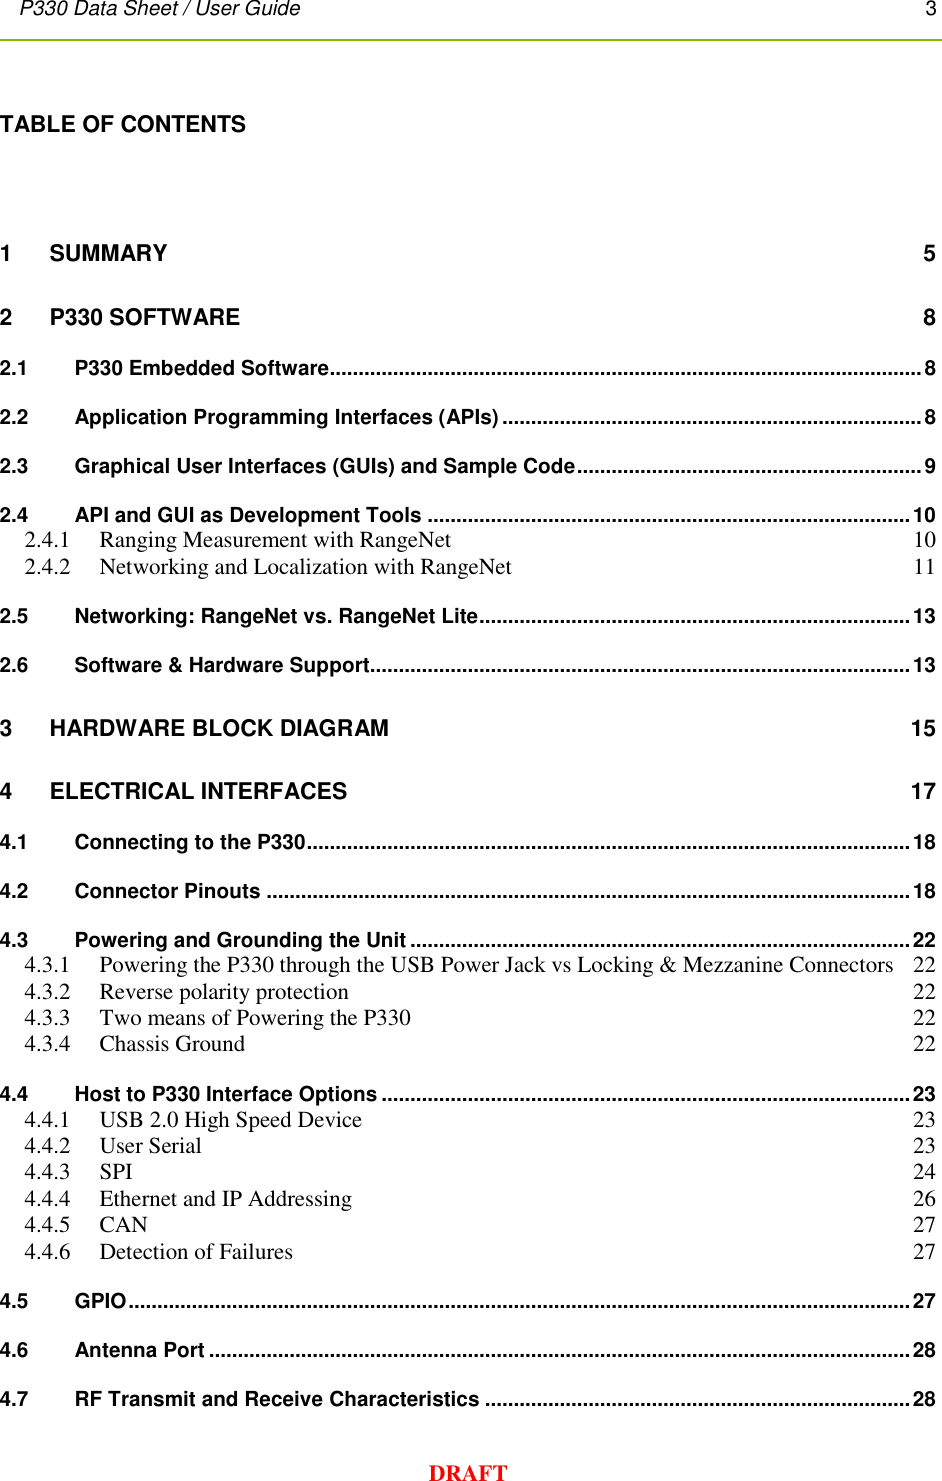 P330 Data Sheet / User Guide       3        DRAFT TABLE OF CONTENTS  1 SUMMARY  5 2   P330 SOFTWARE  8 2.1 P330 Embedded Software ....................................................................................................... 8 2.2 Application Programming Interfaces (APIs) ......................................................................... 8 2.3 Graphical User Interfaces (GUIs) and Sample Code ............................................................ 9 2.4 API and GUI as Development Tools .................................................................................... 10 2.4.1 Ranging Measurement with RangeNet  10 2.4.2 Networking and Localization with RangeNet  11 2.5 Networking: RangeNet vs. RangeNet Lite ........................................................................... 13 2.6 Software &amp; Hardware Support.............................................................................................. 13 3 HARDWARE BLOCK DIAGRAM 15 4 ELECTRICAL INTERFACES  17 4.1 Connecting to the P330 ......................................................................................................... 18 4.2 Connector Pinouts ................................................................................................................ 18 4.3 Powering and Grounding the Unit ....................................................................................... 22 4.3.1  Powering the P330 through the USB Power Jack vs Locking &amp; Mezzanine Connectors  22 4.3.2 Reverse polarity protection  22 4.3.3 Two means of Powering the P330  22 4.3.4 Chassis Ground  22 4.4 Host to P330 Interface Options ............................................................................................ 23 4.4.1 USB 2.0 High Speed Device  23 4.4.2 User Serial  23 4.4.3 SPI  24 4.4.4 Ethernet and IP Addressing  26 4.4.5 CAN  27 4.4.6 Detection of Failures  27 4.5 GPIO ........................................................................................................................................ 27 4.6 Antenna Port .......................................................................................................................... 28 4.7 RF Transmit and Receive Characteristics .......................................................................... 28 